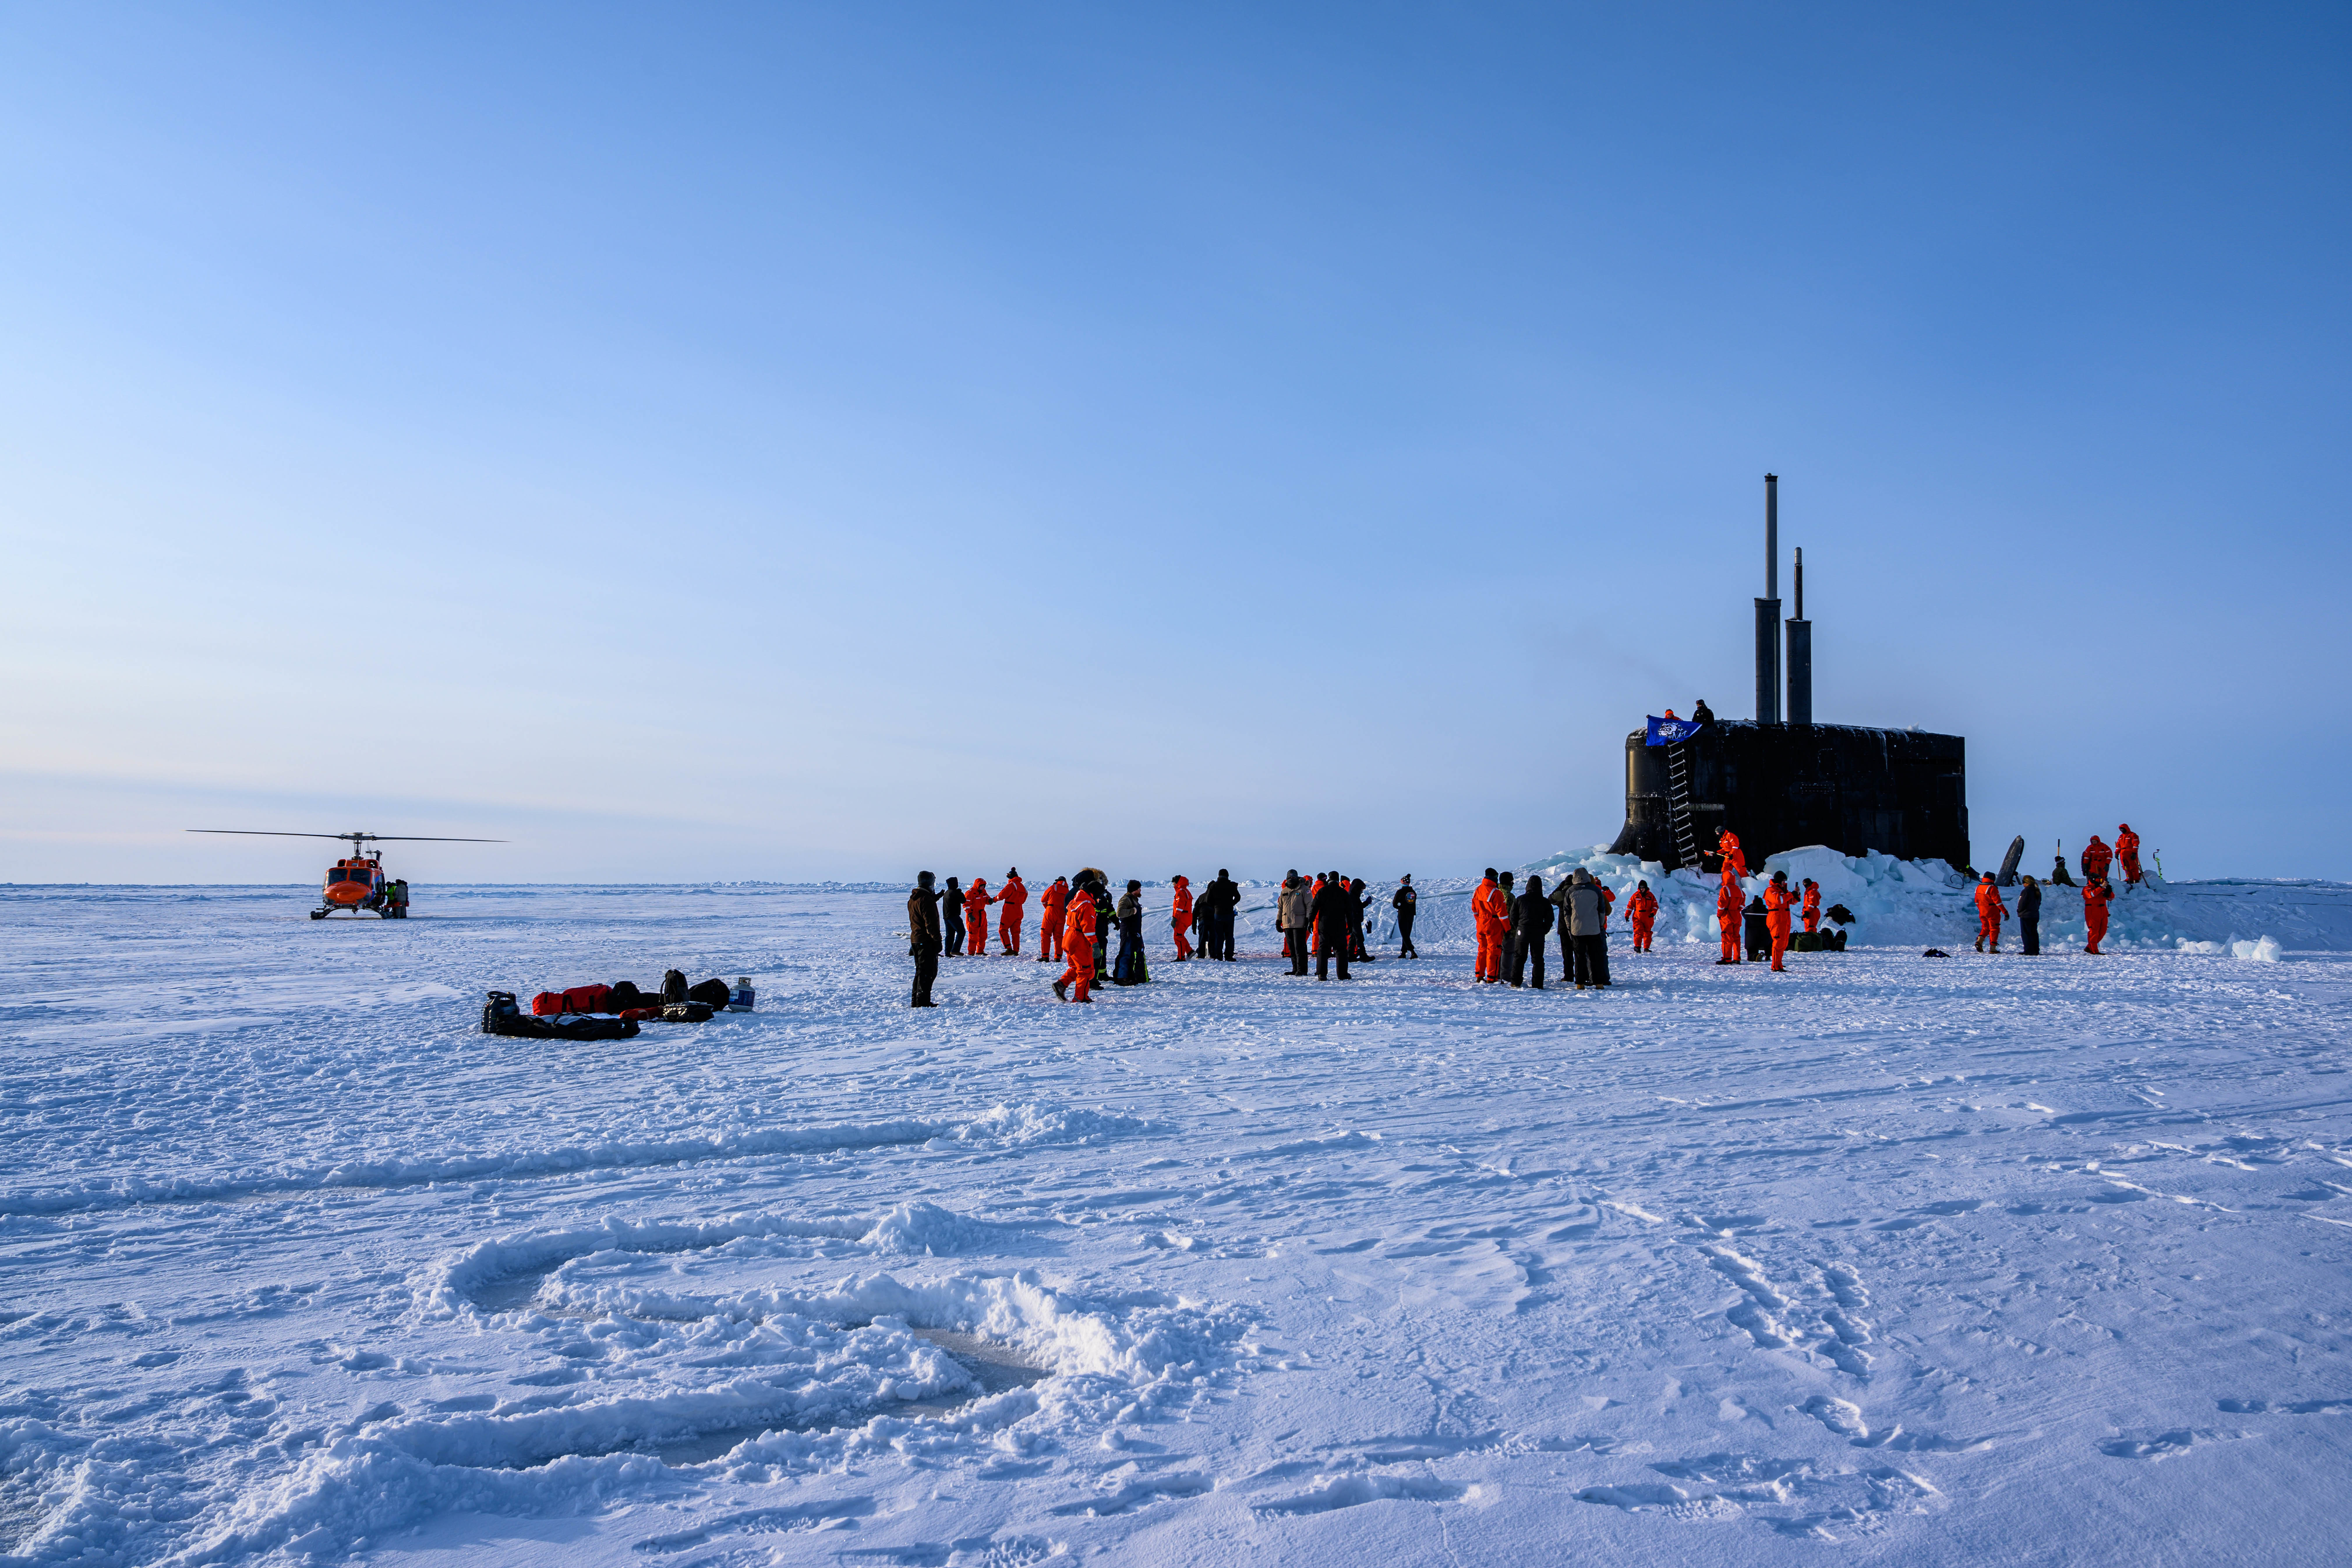 The crew of the U.S. Navy's Seawolf-class submarine Connecticut enjoys ice liberty after surfacing in the Arctic Circle during Ice Exercise 2020 on March 7, 2020. ICEX is a biennial submarine exercise that promotes interoperability between allies and partners to maintain operational readiness and regional stability, while improving capabilities to operate in the Arctic environment. (MC1 Michael B. Zingaro/U.S. Navy)